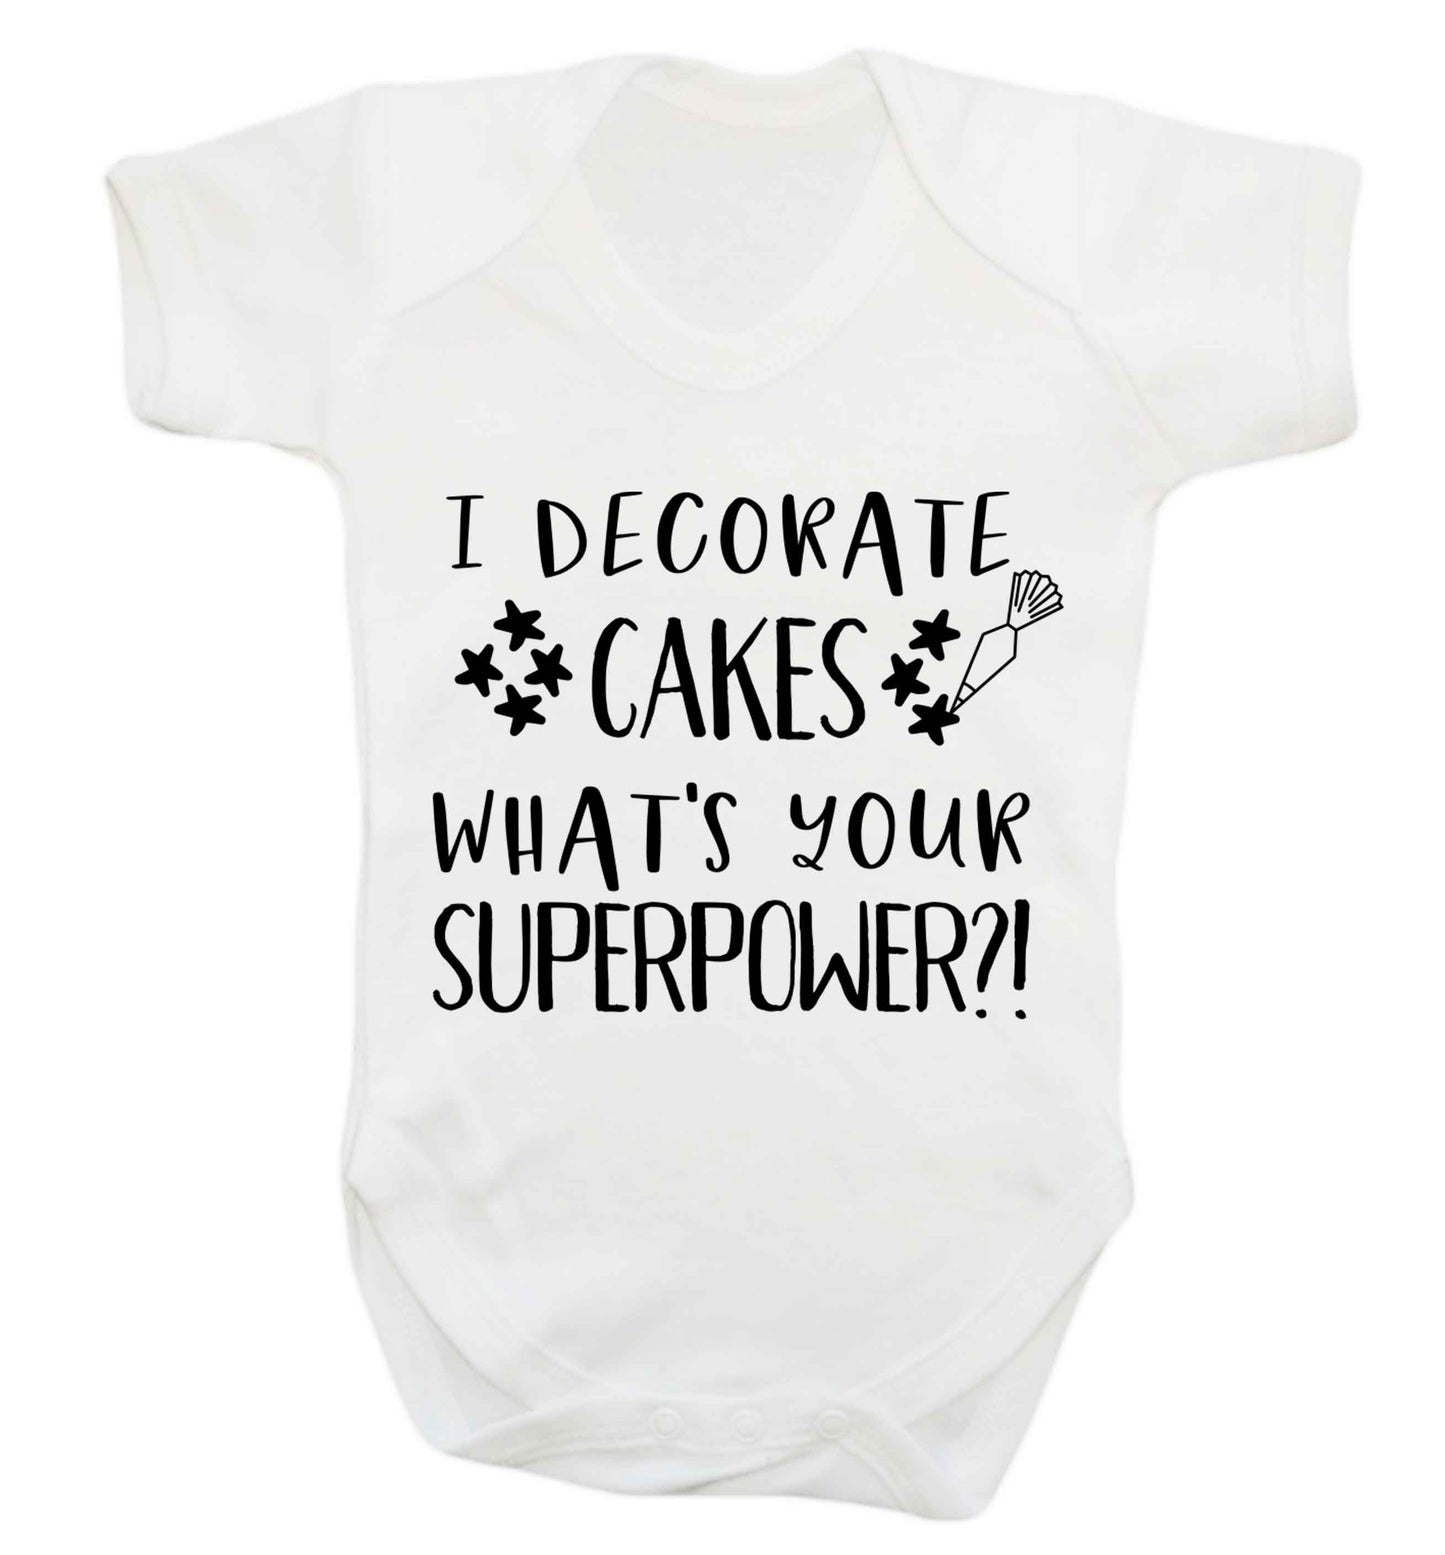 I decorate cakes what's your superpower?! Baby Vest white 18-24 months